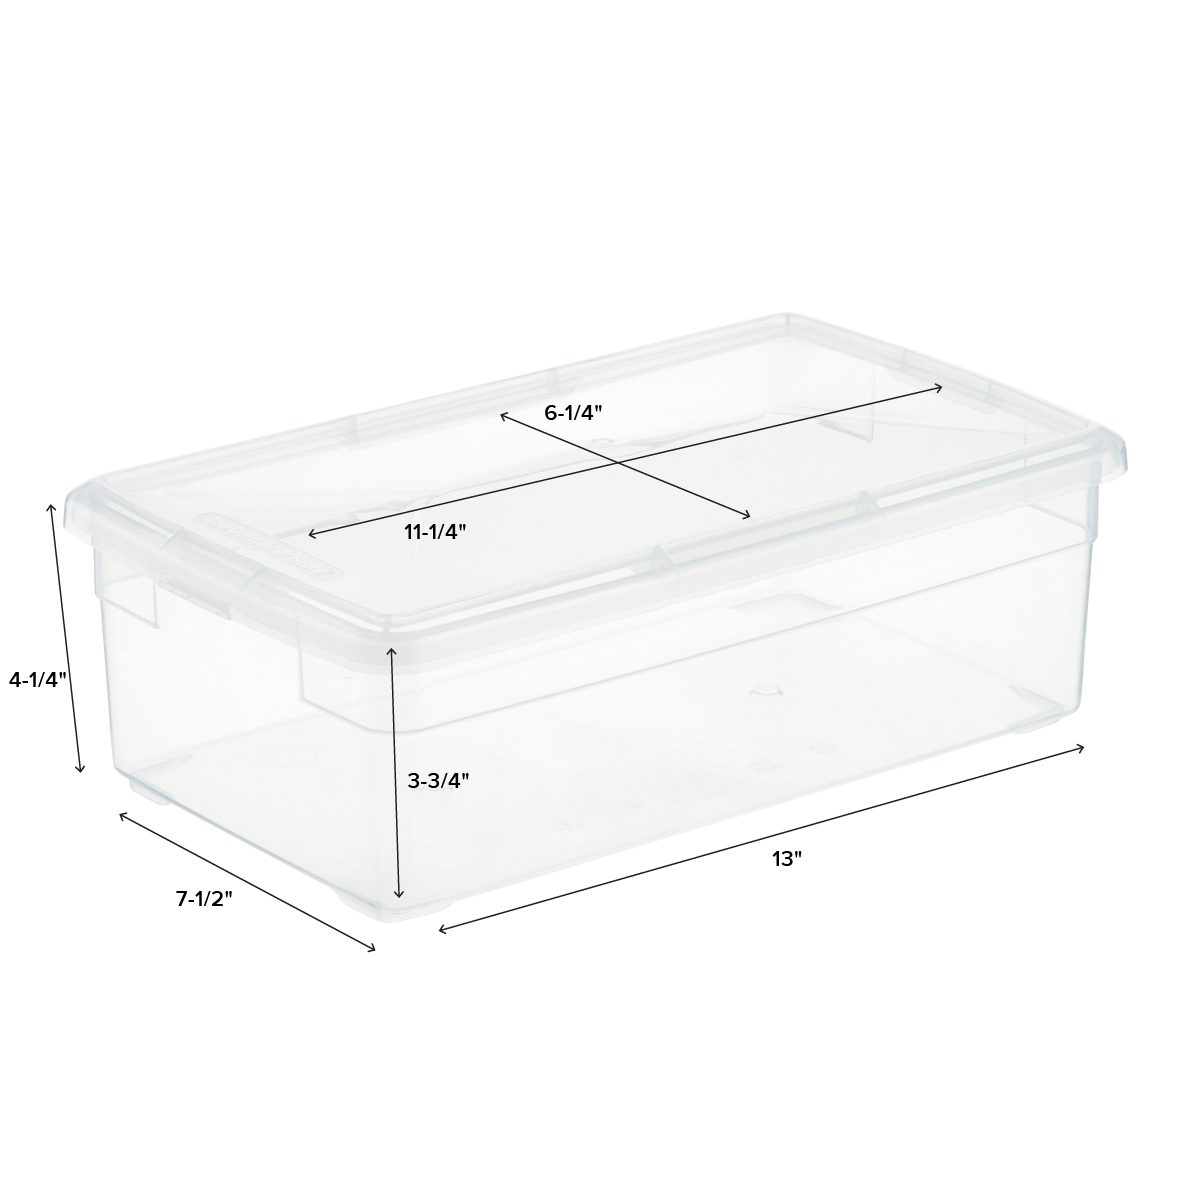 25 Clear Plastic Mini CUBE Boxes; 1 1/2 x 1 1/2 x 1 1/2 Inches Retail and Gifts 